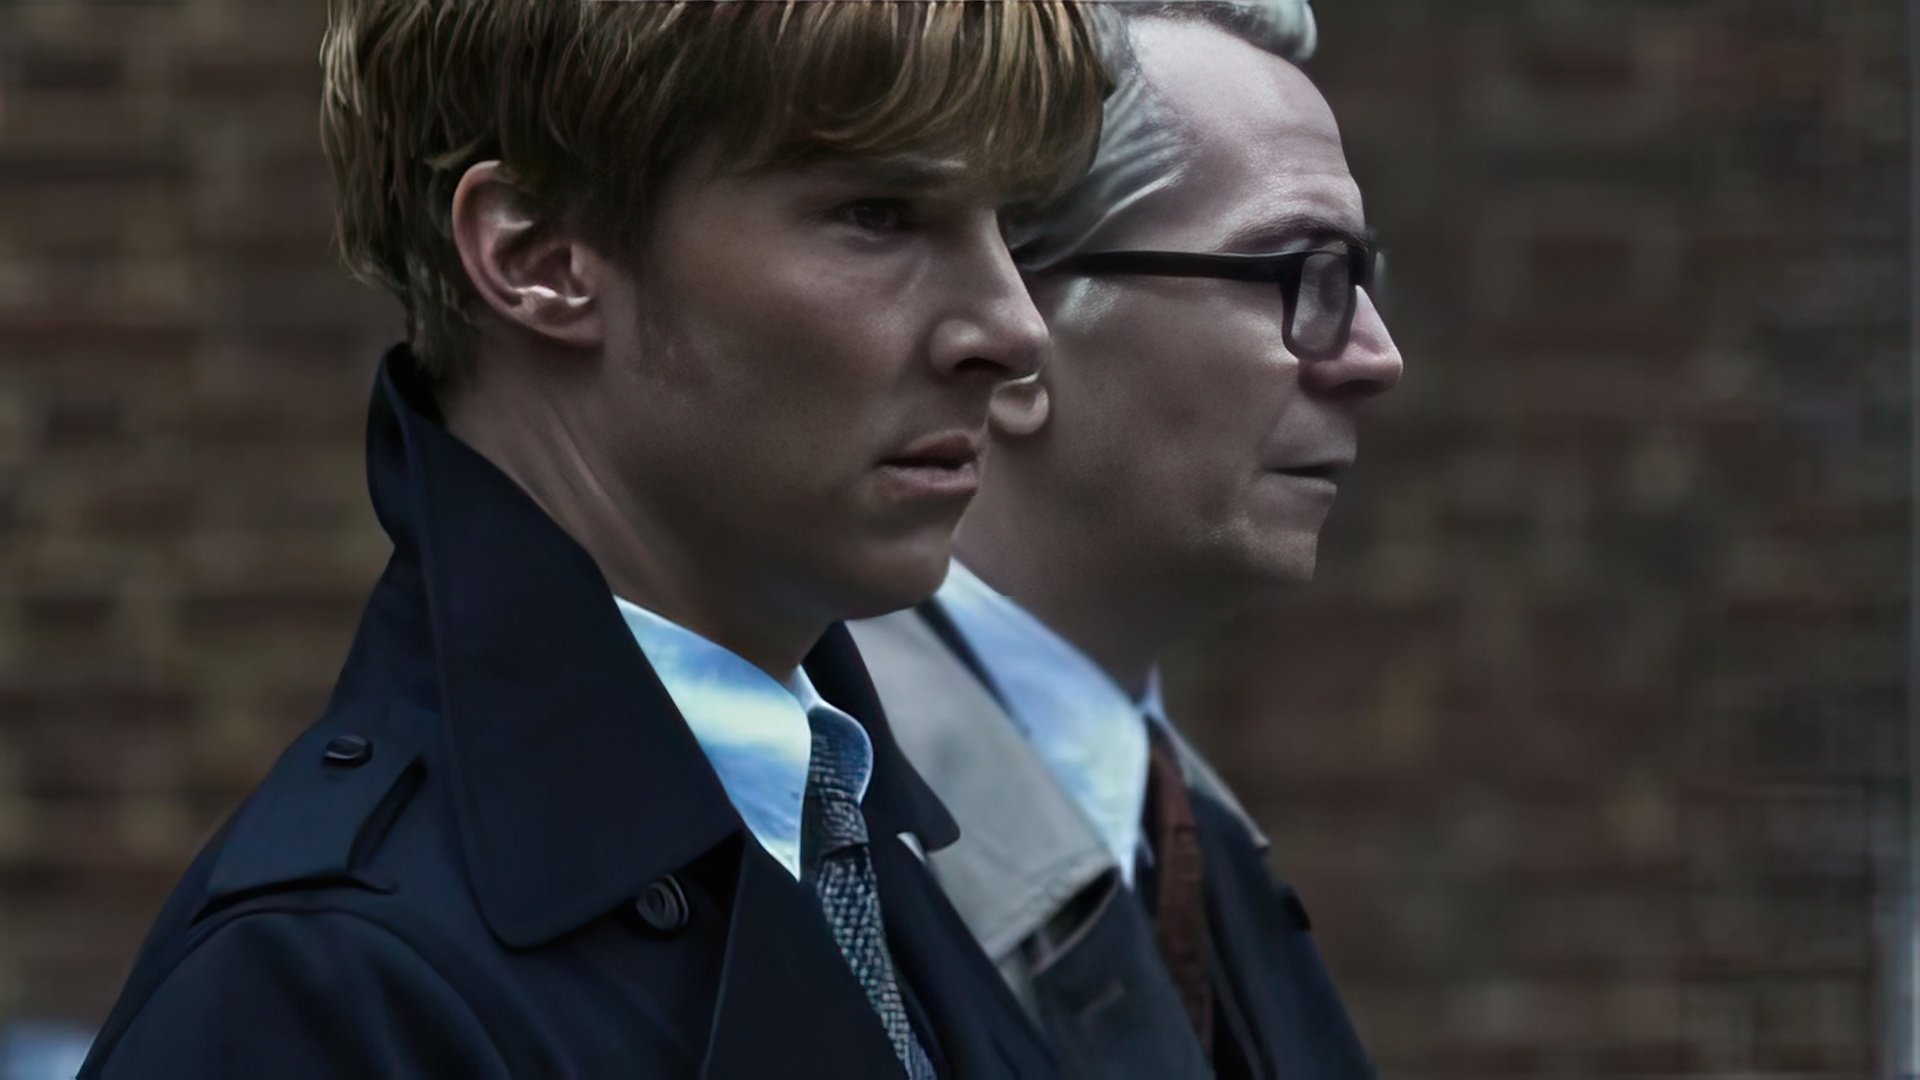 Tinker Tailor Soldier Spy: Benedict Cumberbatch and Gary Oldman